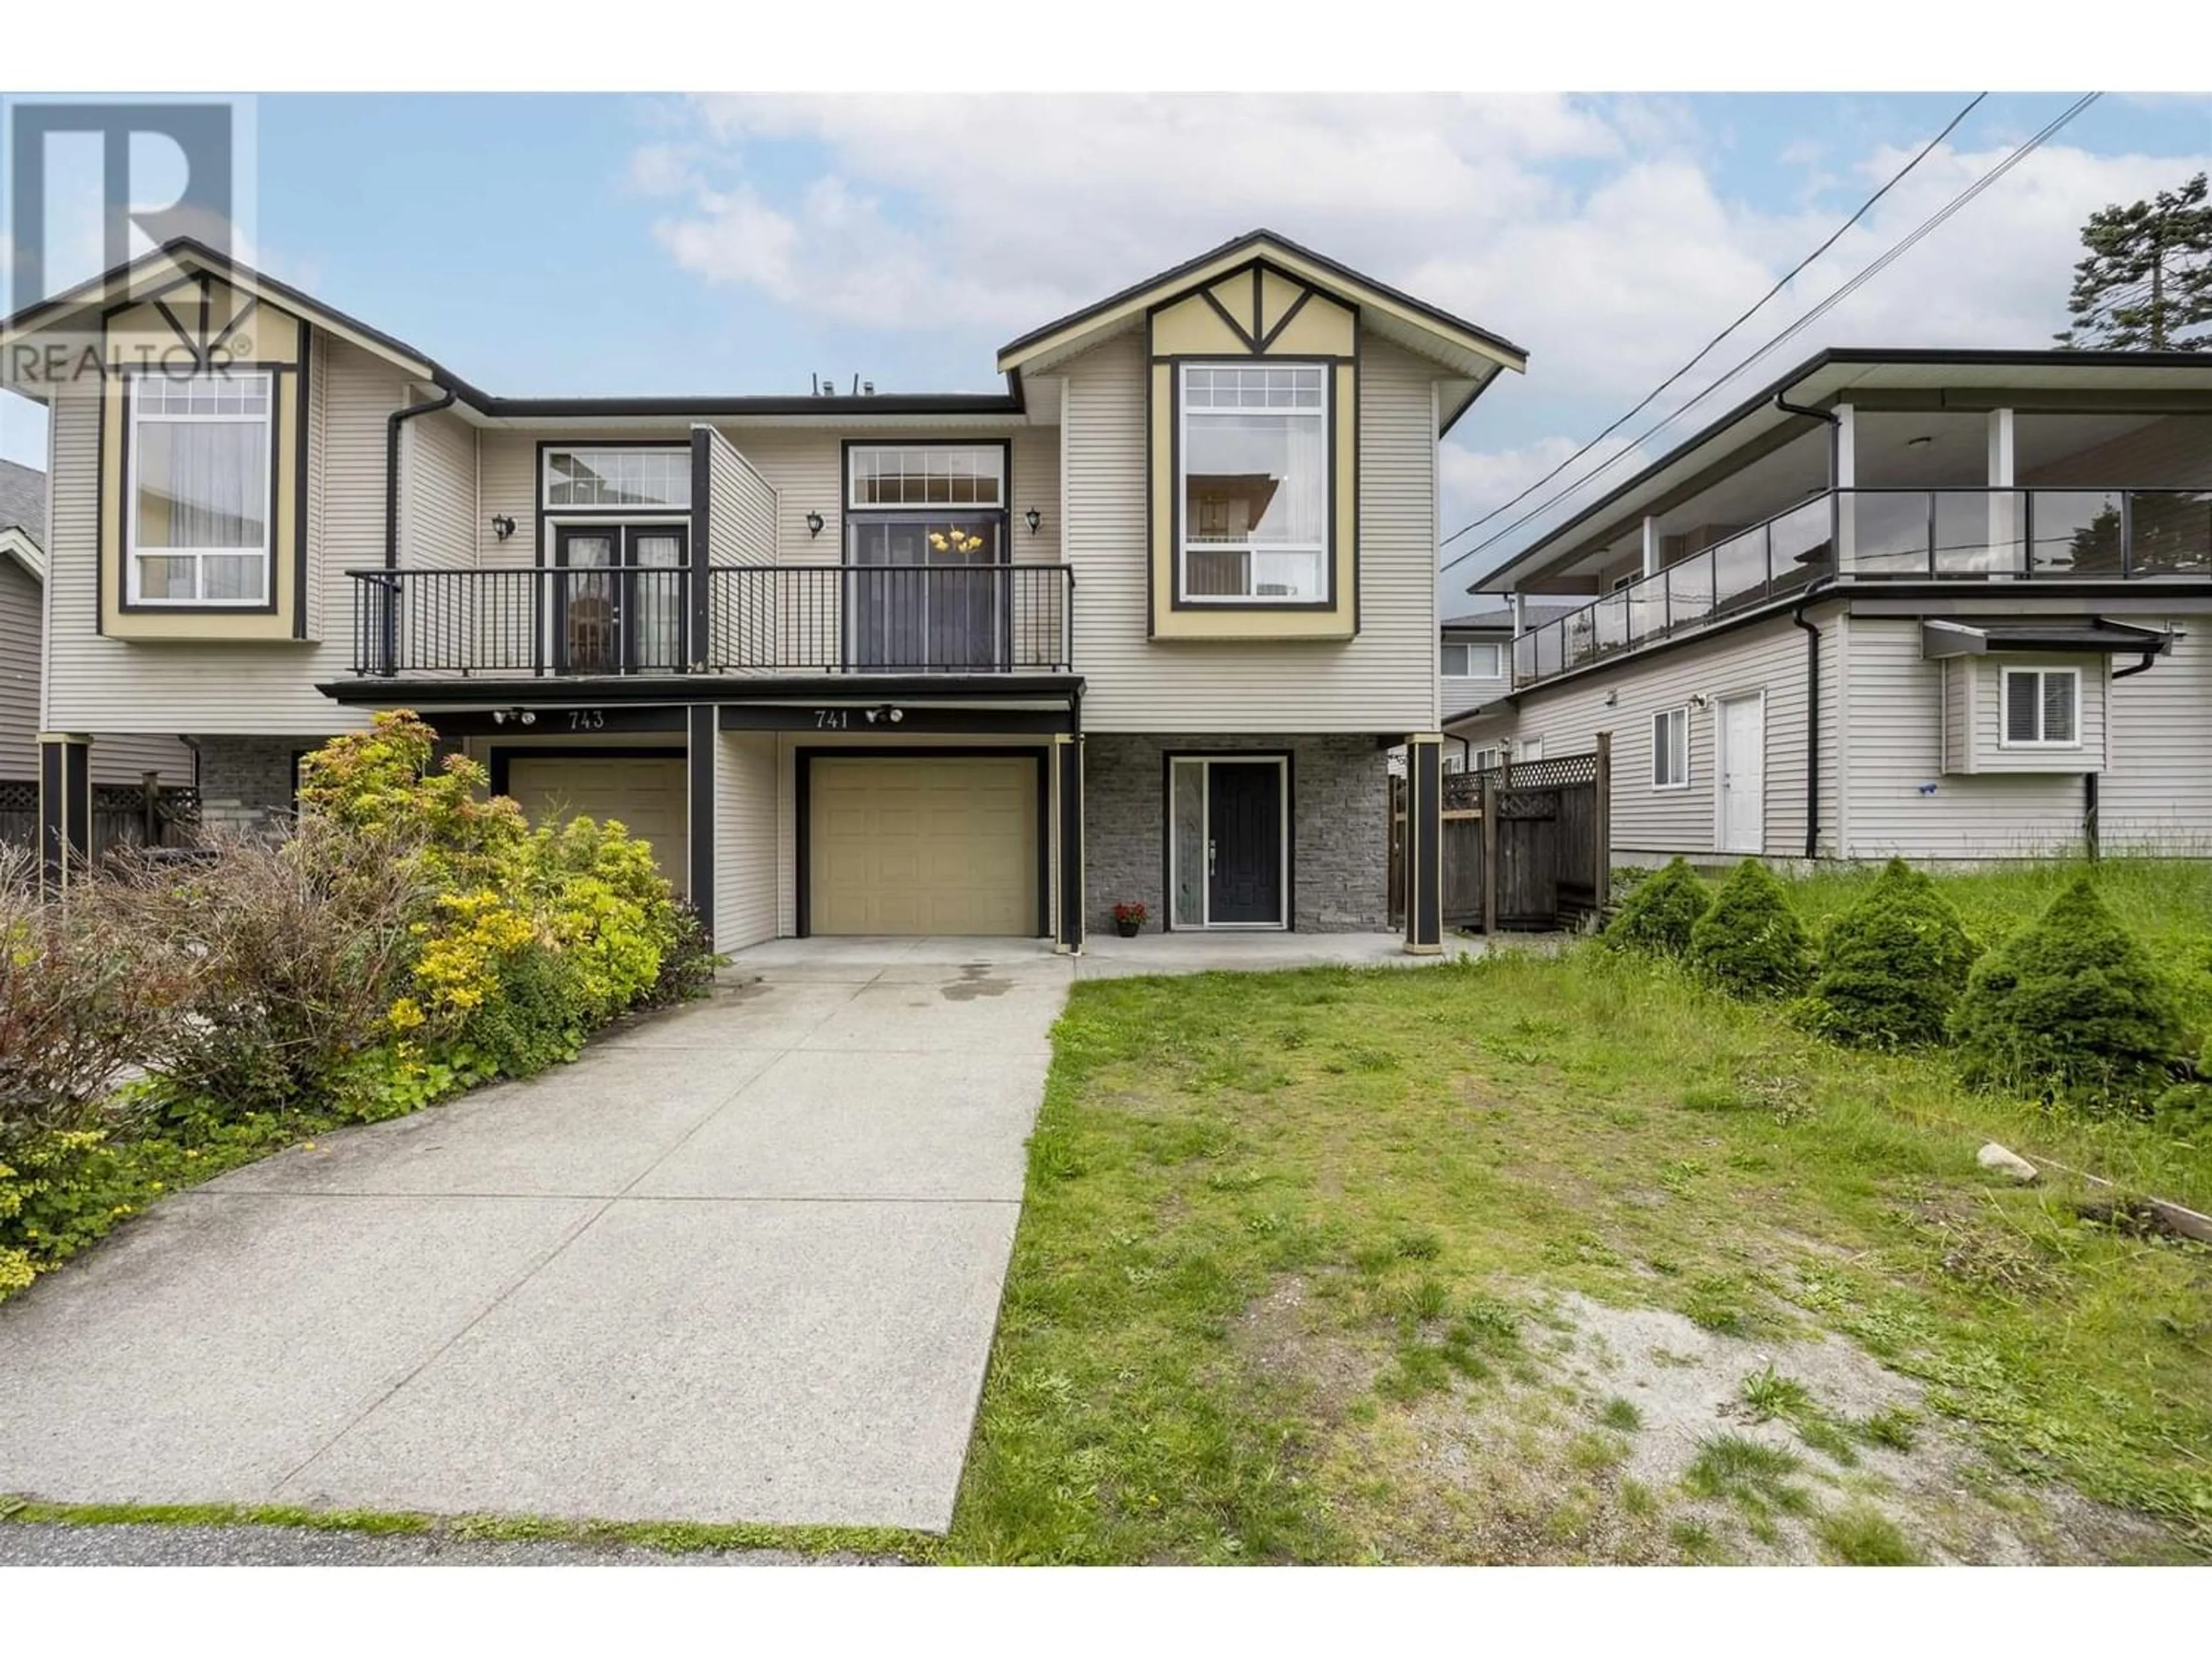 Frontside or backside of a home for 741 DOGWOOD STREET, Coquitlam British Columbia V3J4B8